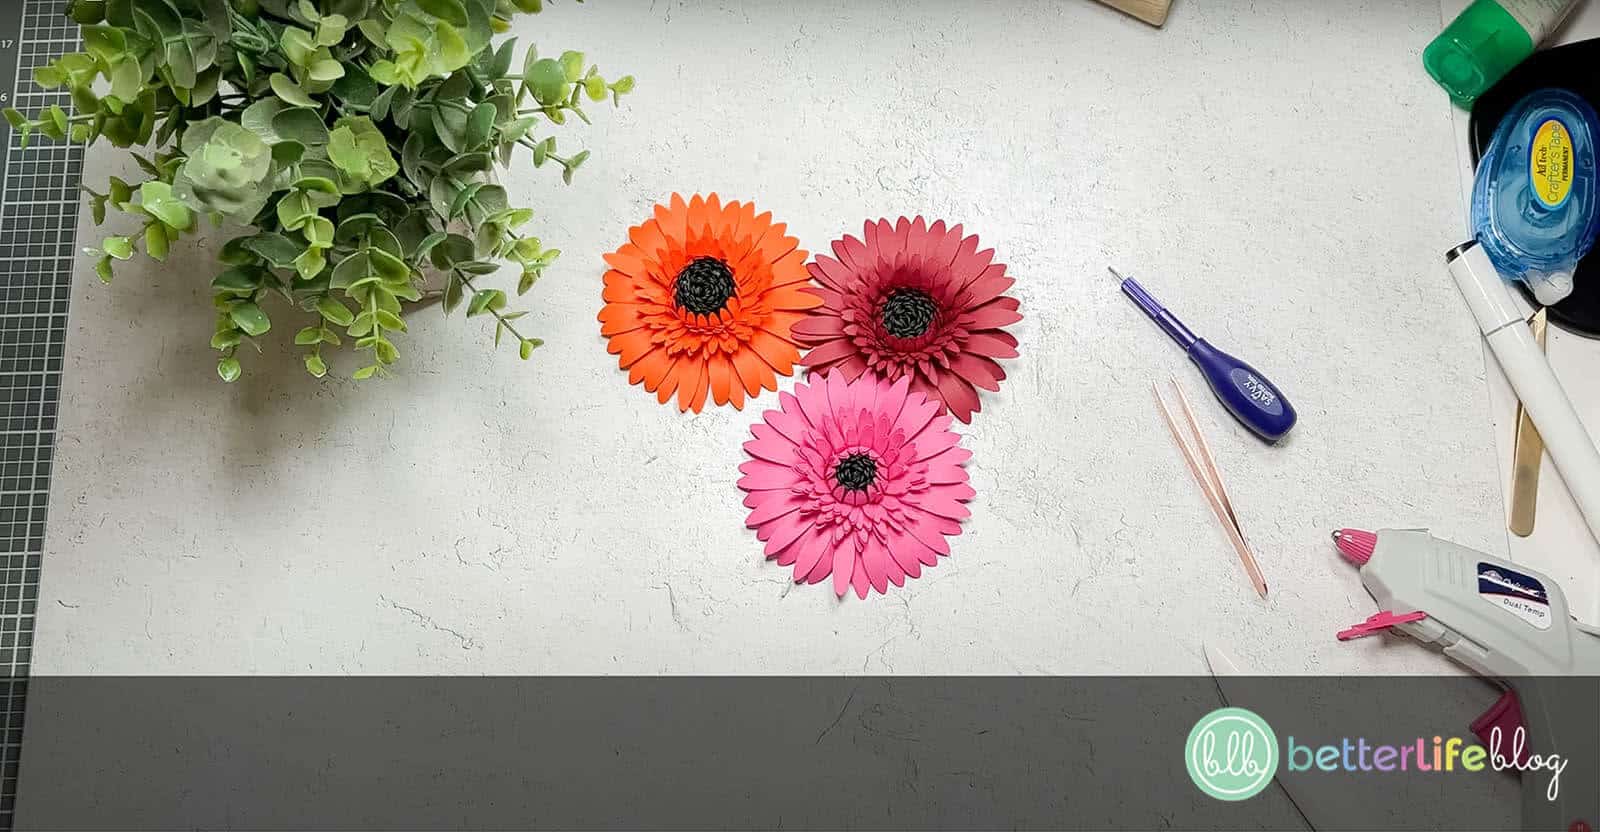 Making paper flowers with a Cricut machine is as easy as 1-2-3. Take a look at my blog post for full step-by-step instructions so that you can create your very own Paper Gerbera Daisies.